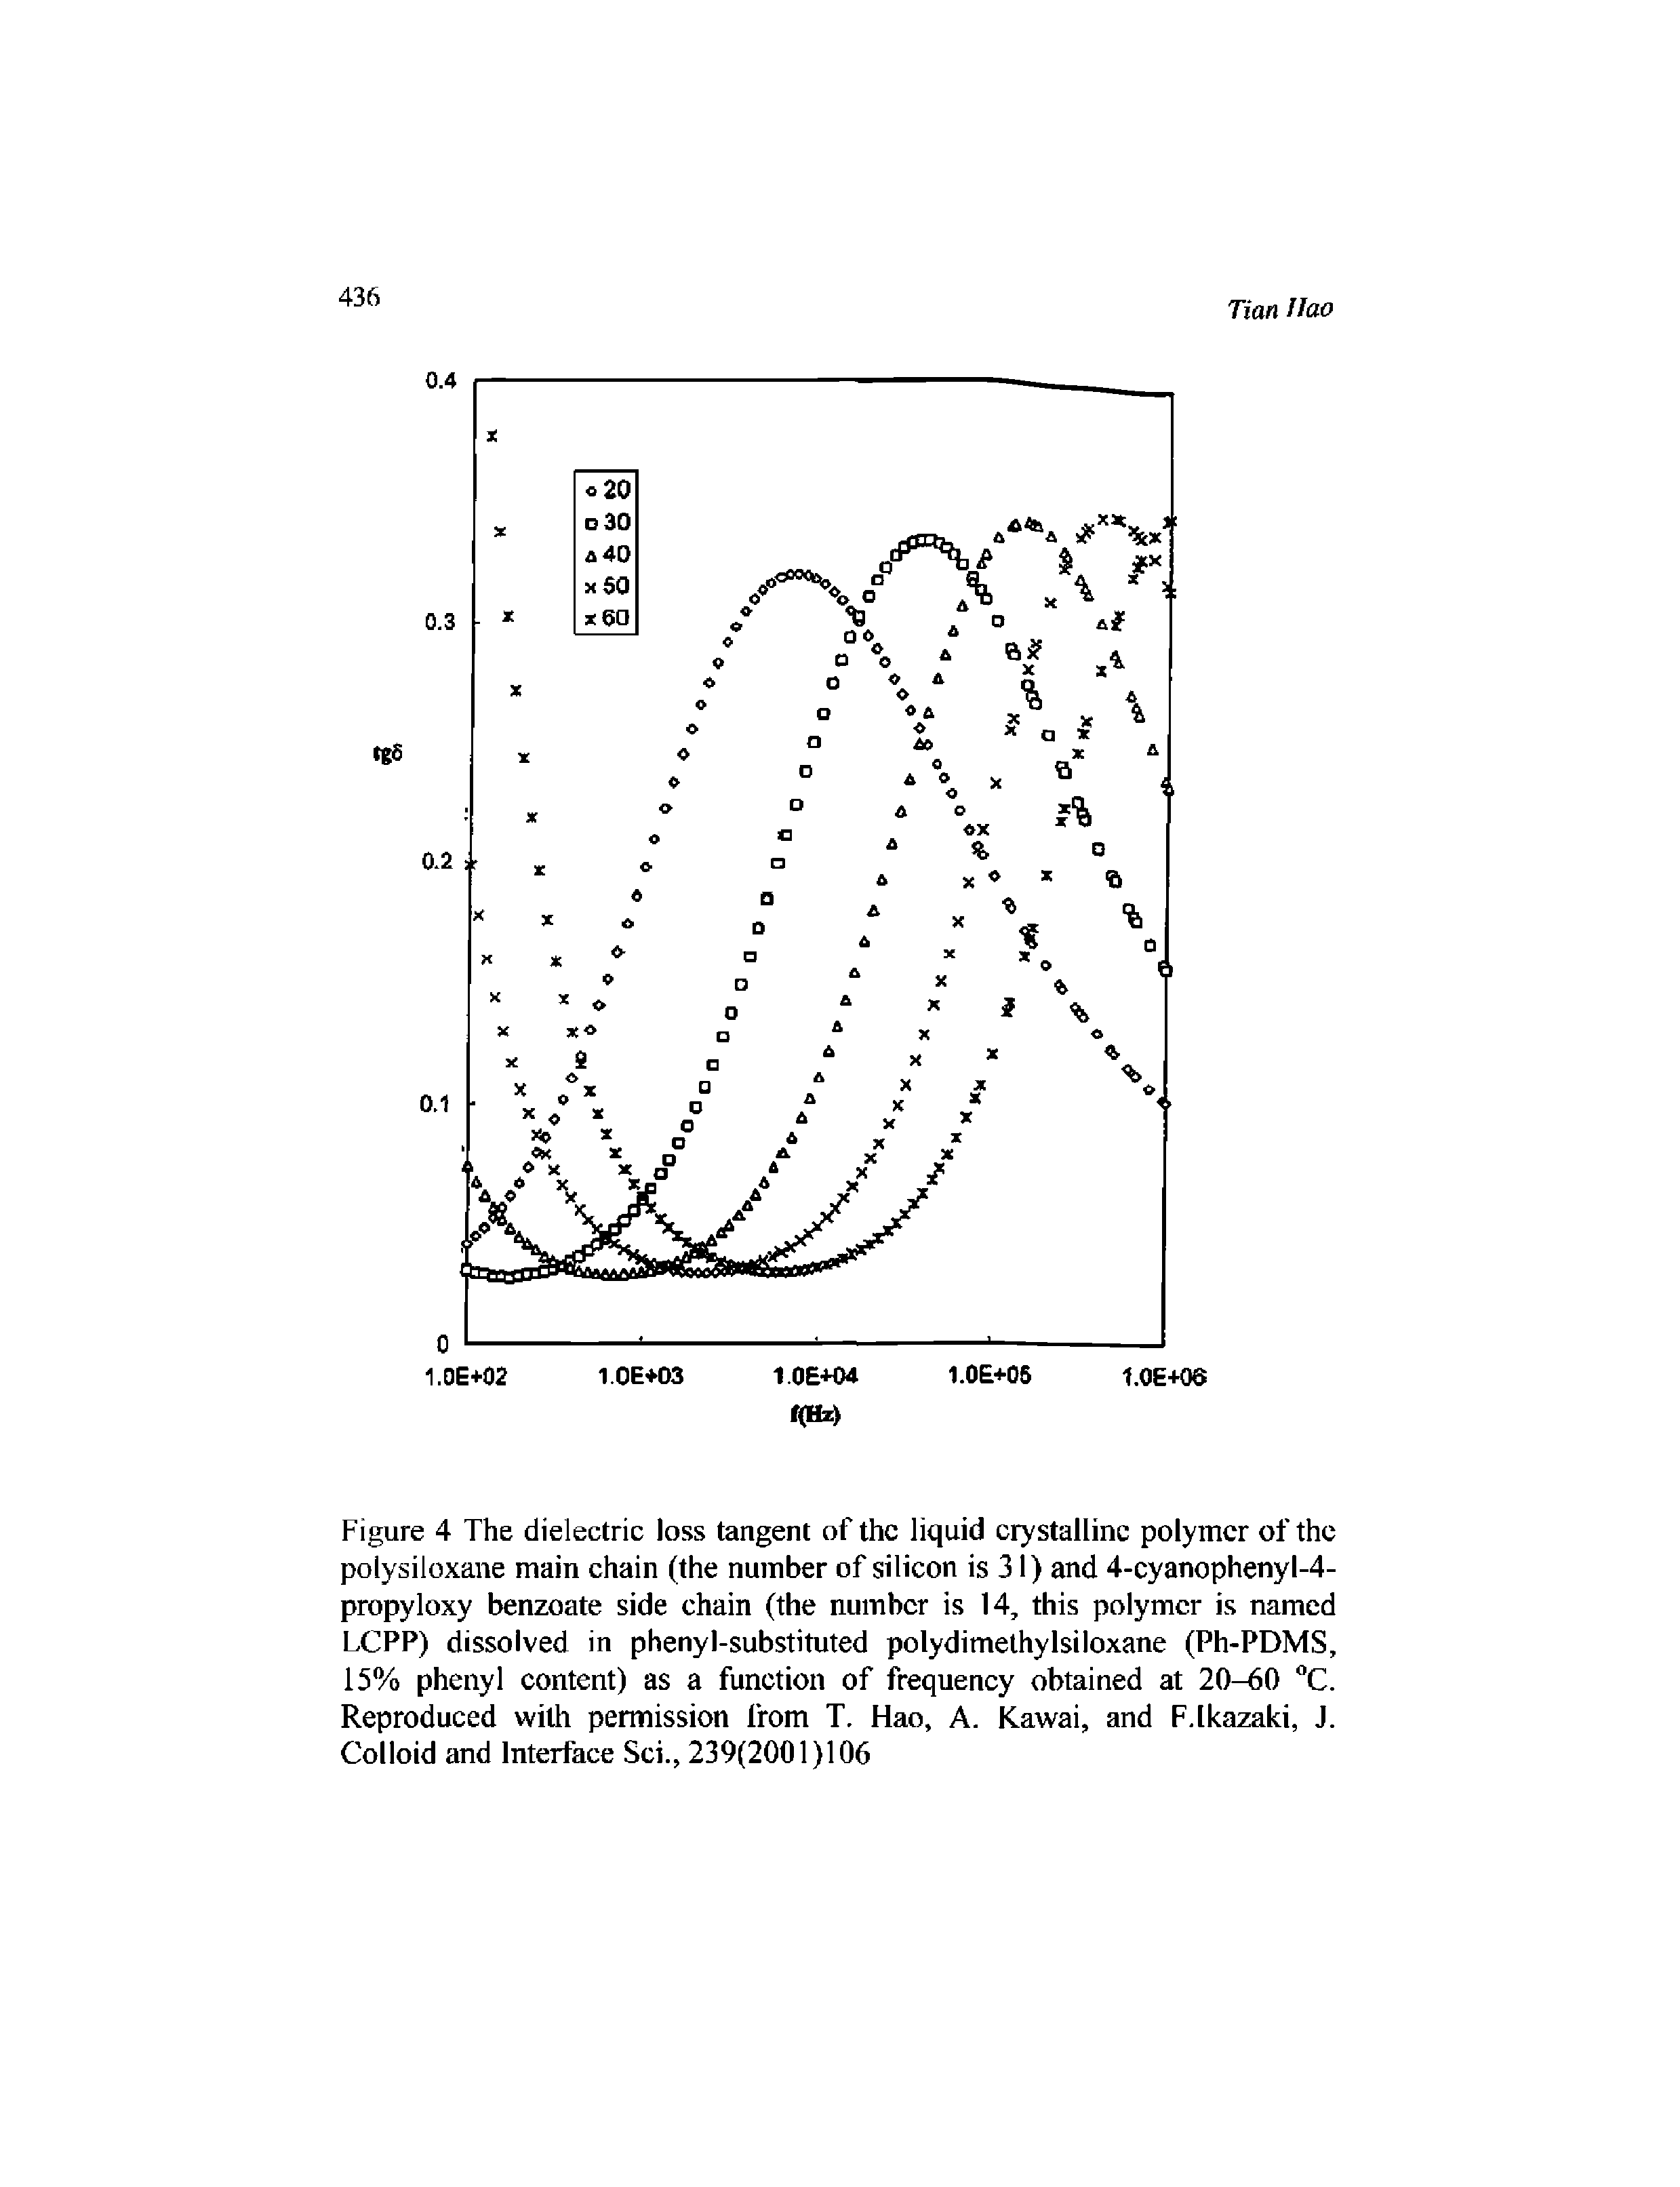 Figure 4 The dielectric loss tangent of the liquid crystalline polymer of the polysiloxane main chain (the number of silicon is 31) and 4-cyanophenyl-4-propyloxy benzoate side chain (the number is 14, this polymer is named LCPP) dissolved in phenyl-substituted polydimethylsiloxane (Ph-PDMS, 15% phenyl content) as a function of frequency obtained at 20-60 "C. Reproduced with permission from T. Hao, A. Kawai, and F.lkazaki, J. Colloid and Interface Sci., 239(2001)106...